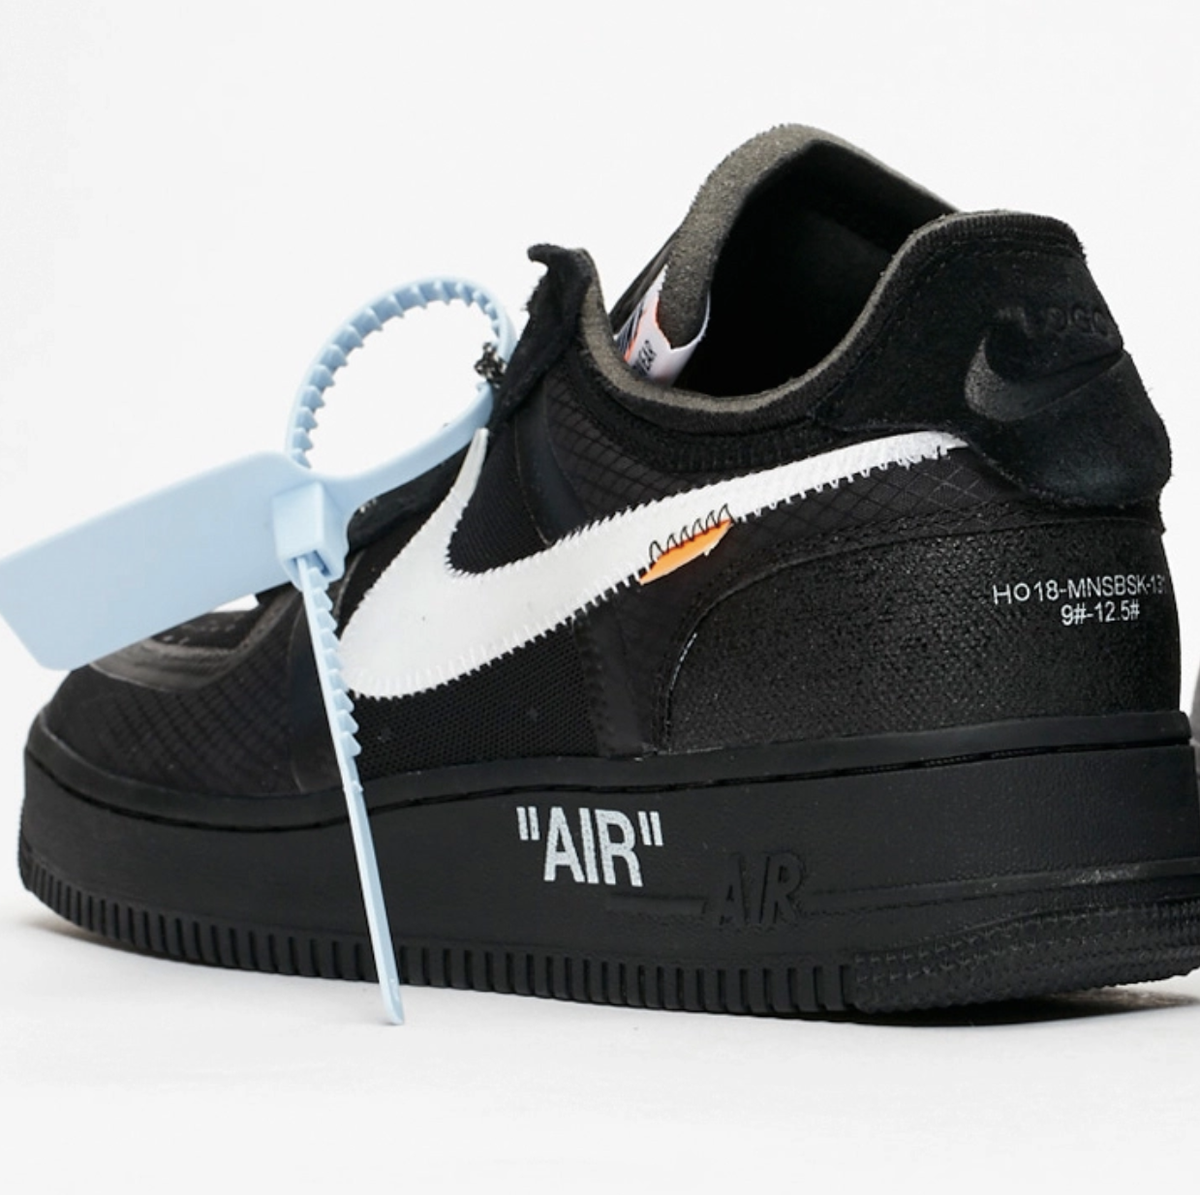 Paraíso innovación manual Off-White x Nike Air Force 1 Low | Off-White Releases